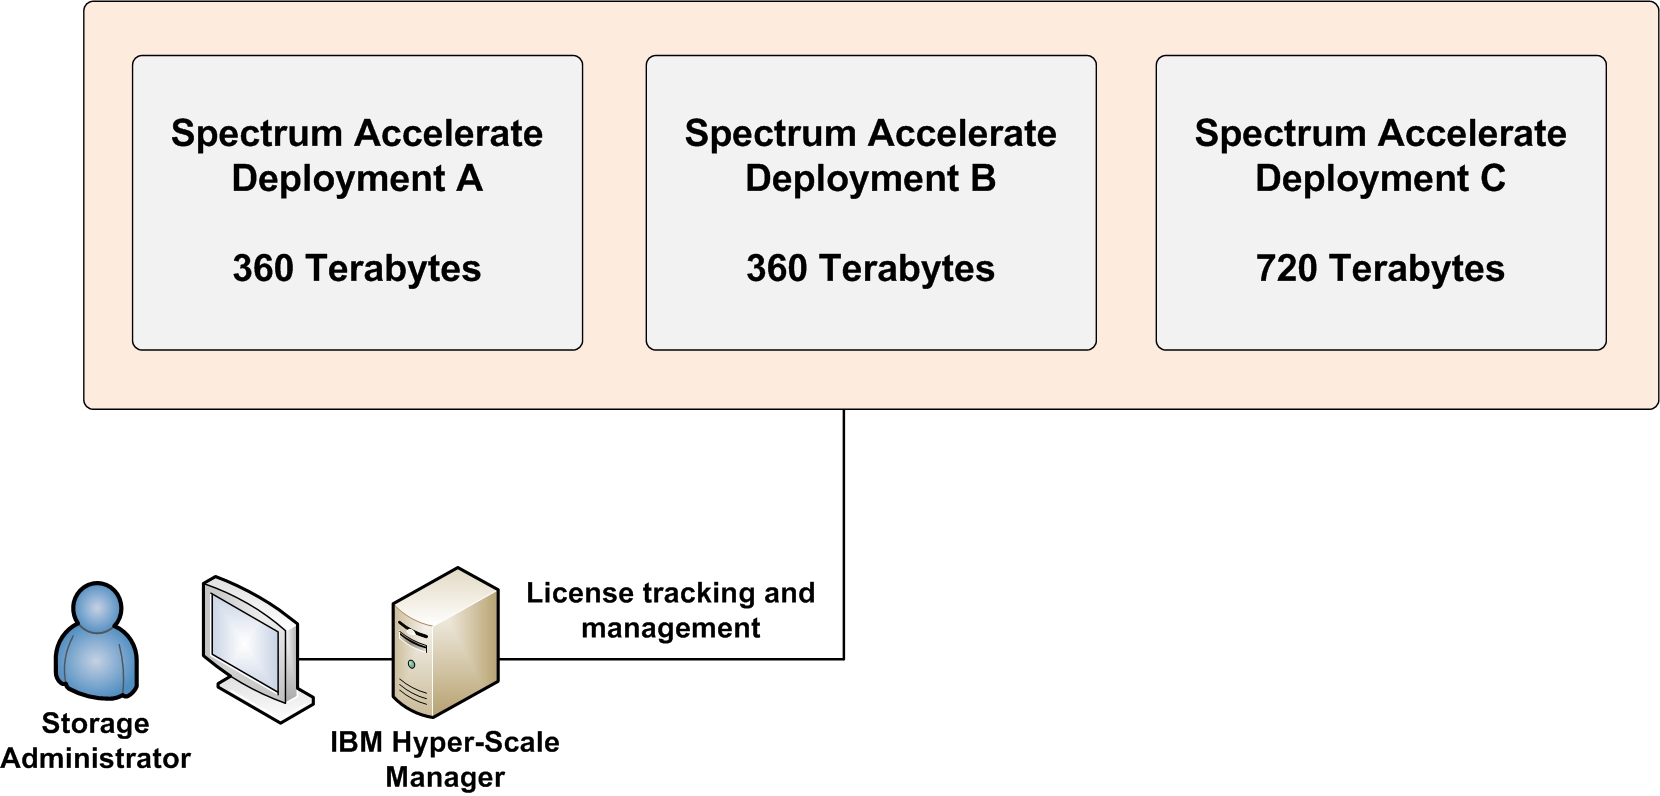 This image shows the IBM Spectrum Accelerate licensing and reporting concept.